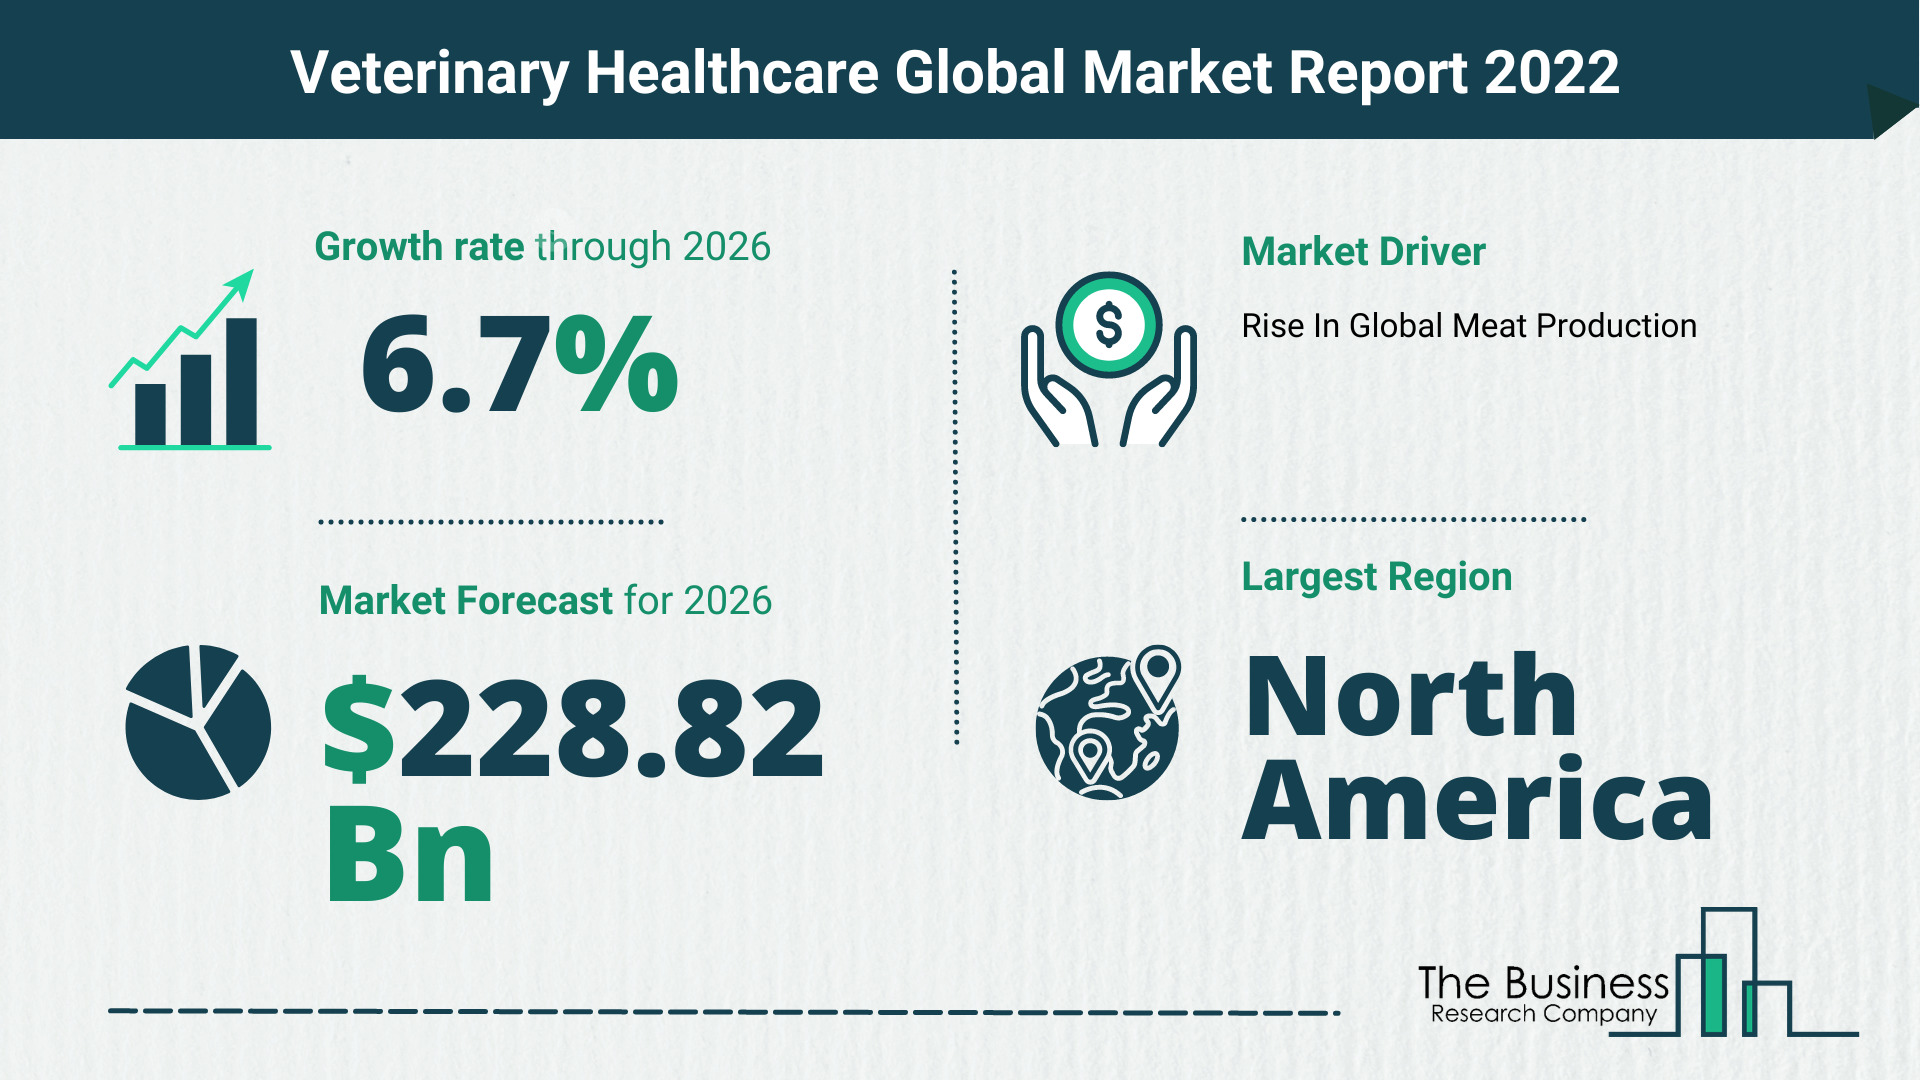 How Will The Veterinary Healthcare Market Grow In 2022?